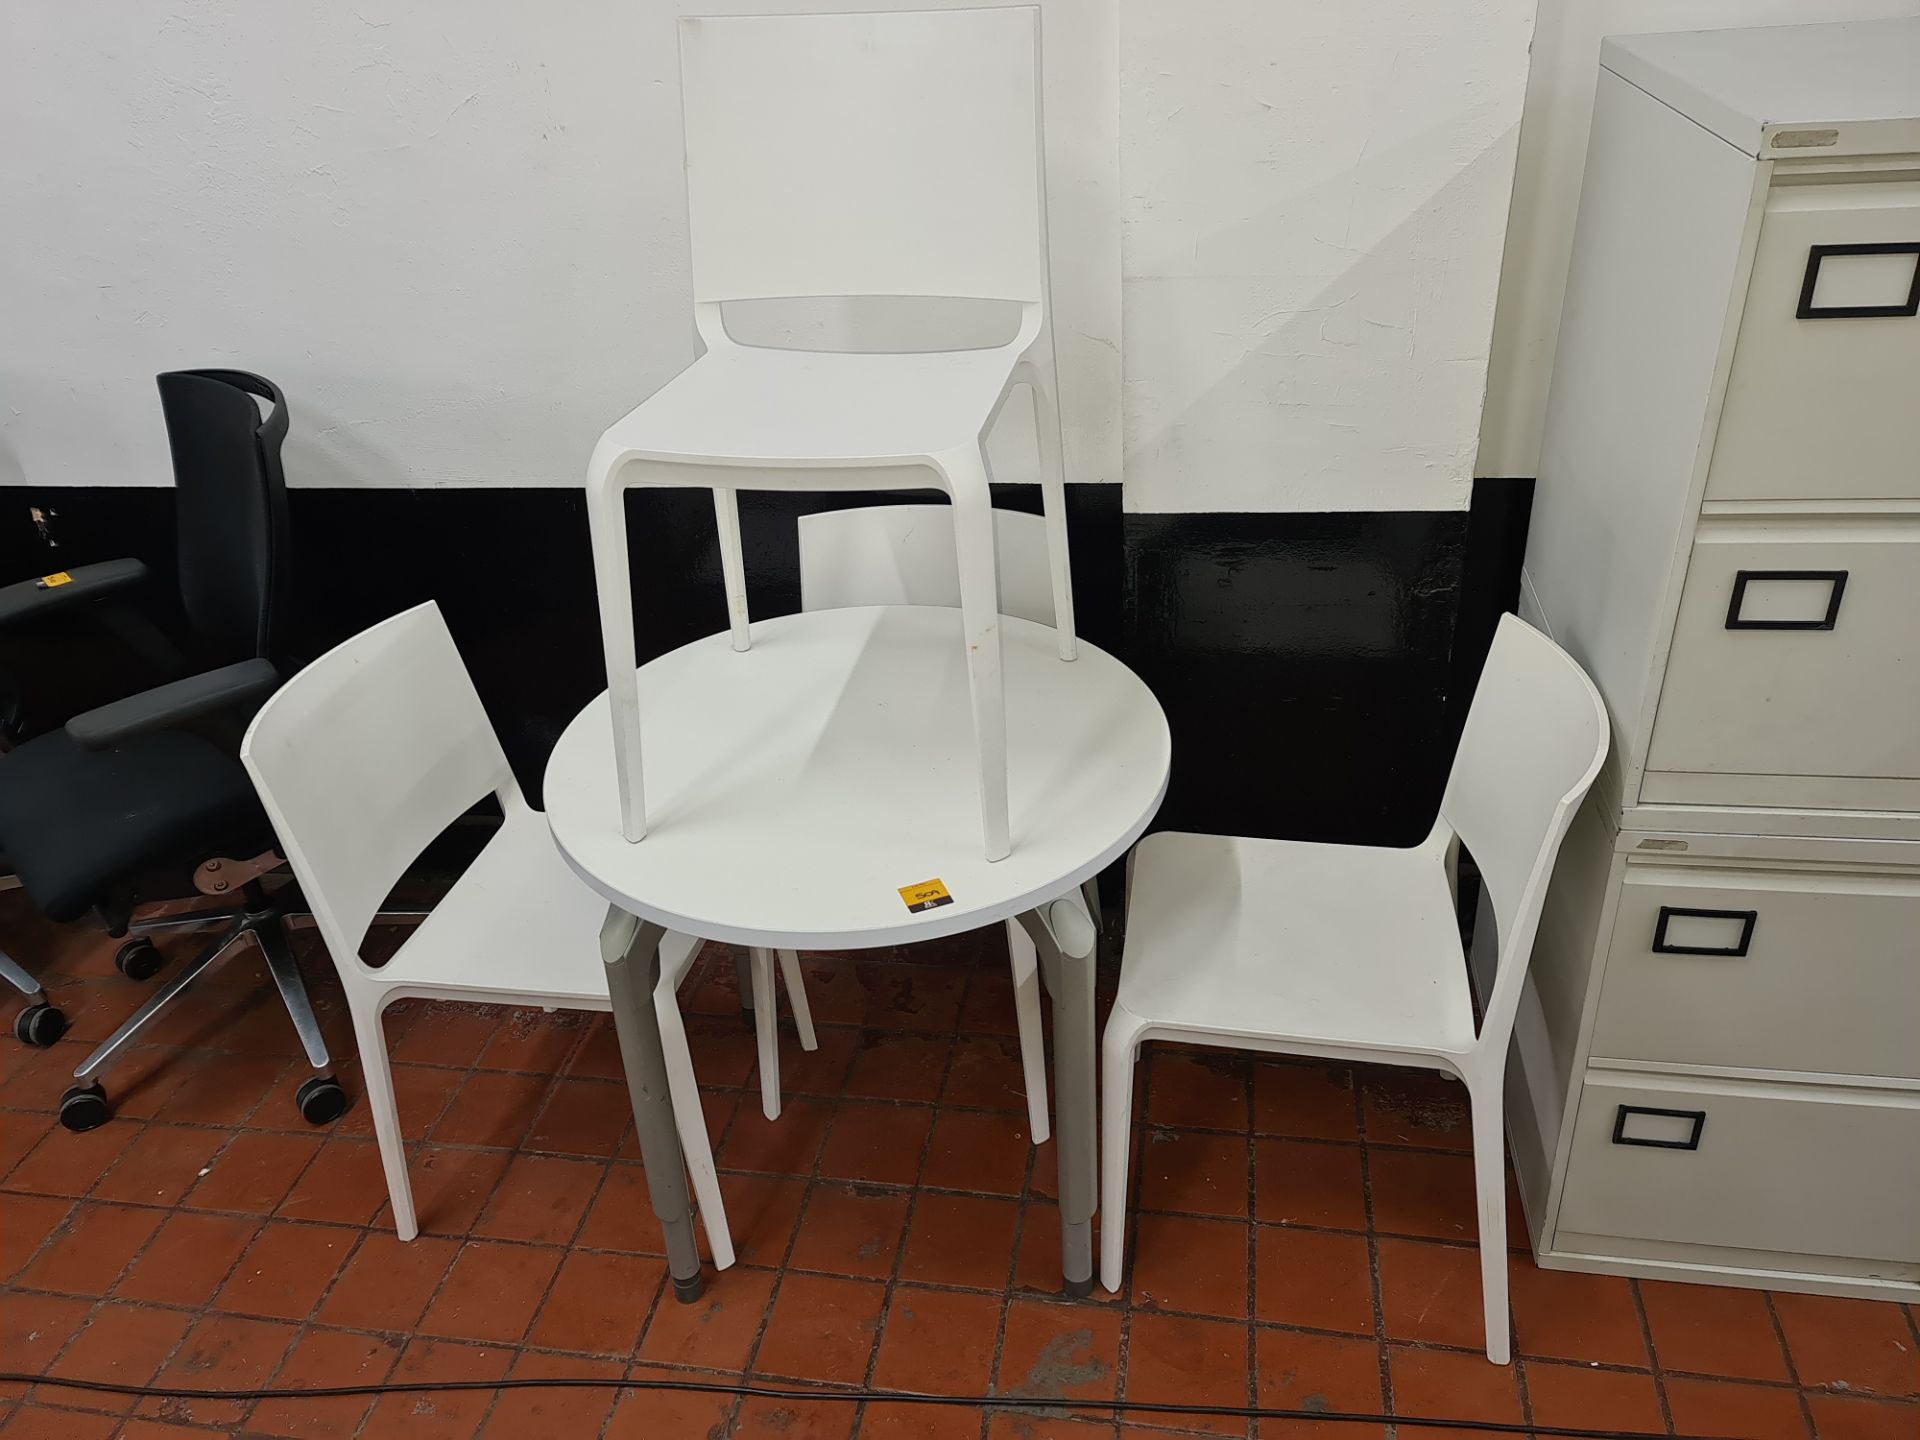 Table & chair set comprising white round table on silver legs plus 4 white chairs